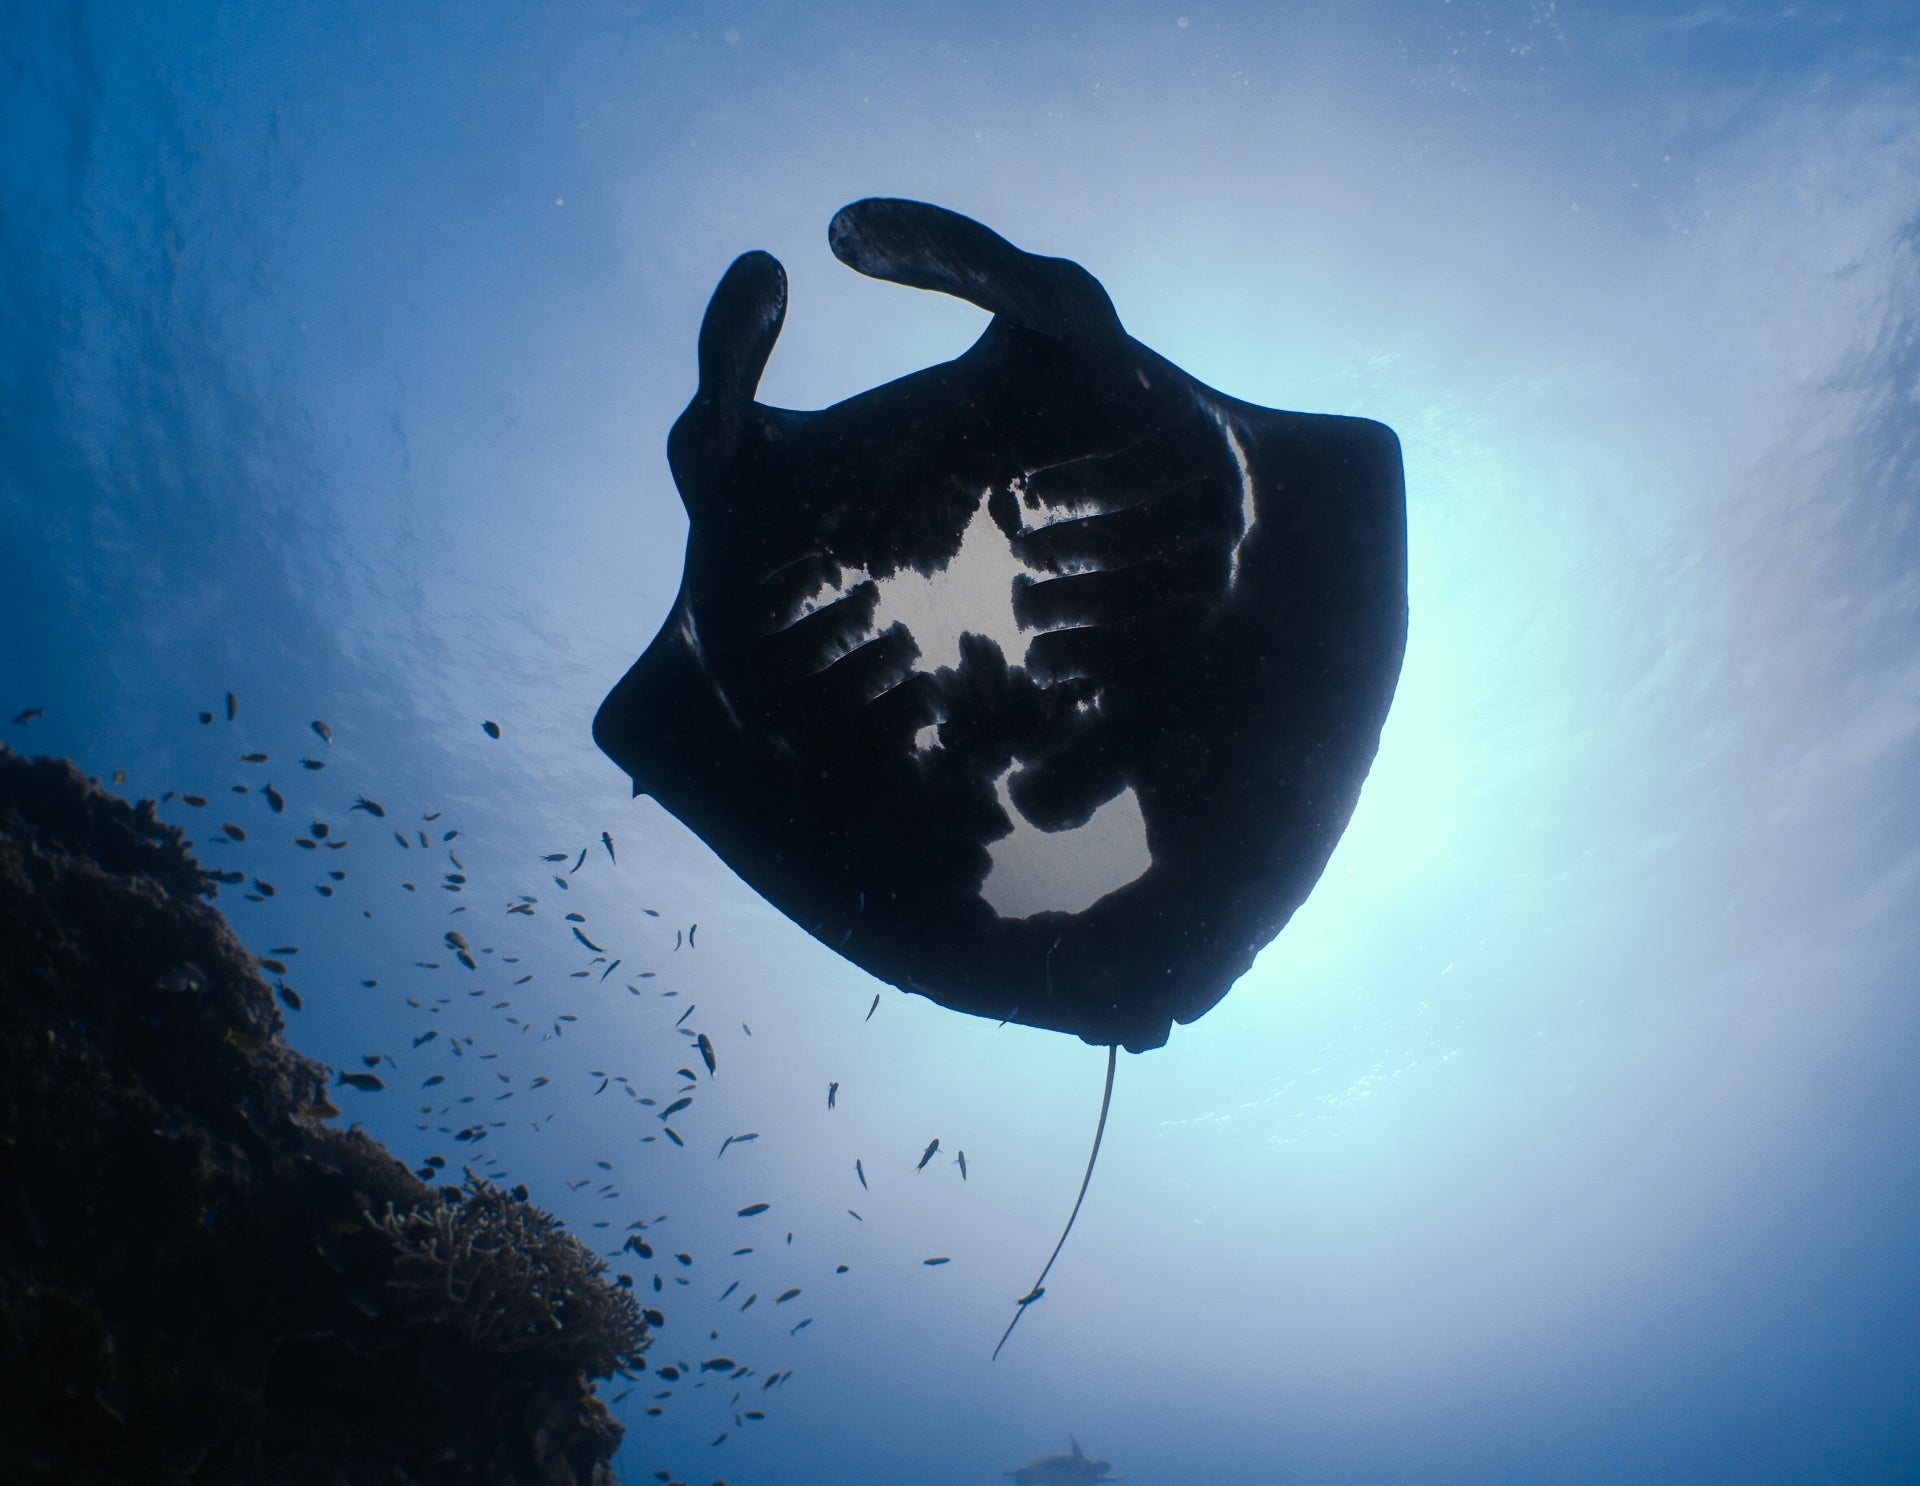 Scientists are trying to work out why some manta rays have black blotches on their skin